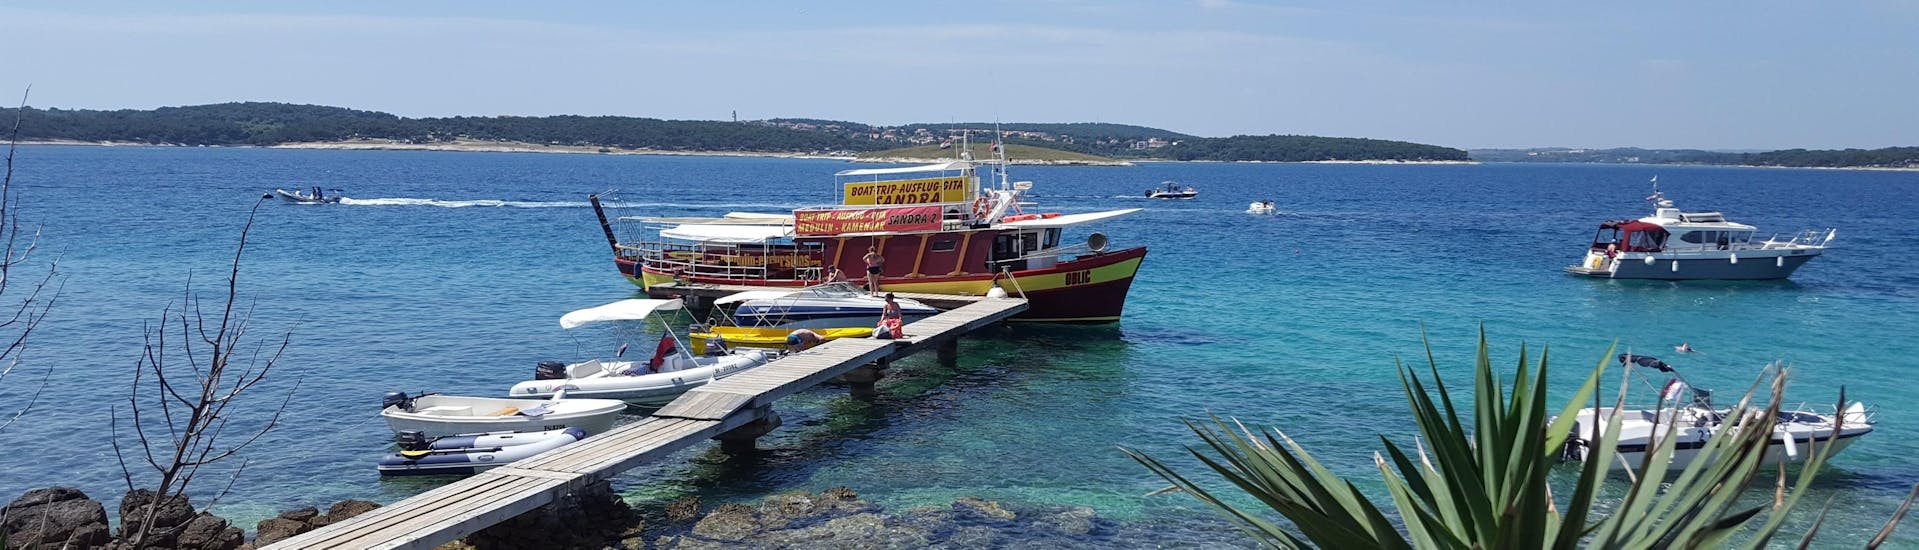 The boat from Medulin Excursions is moored at the jetty as people taking part in the Private Boat Trip to Cape Kamenjak from Medulin get on board.